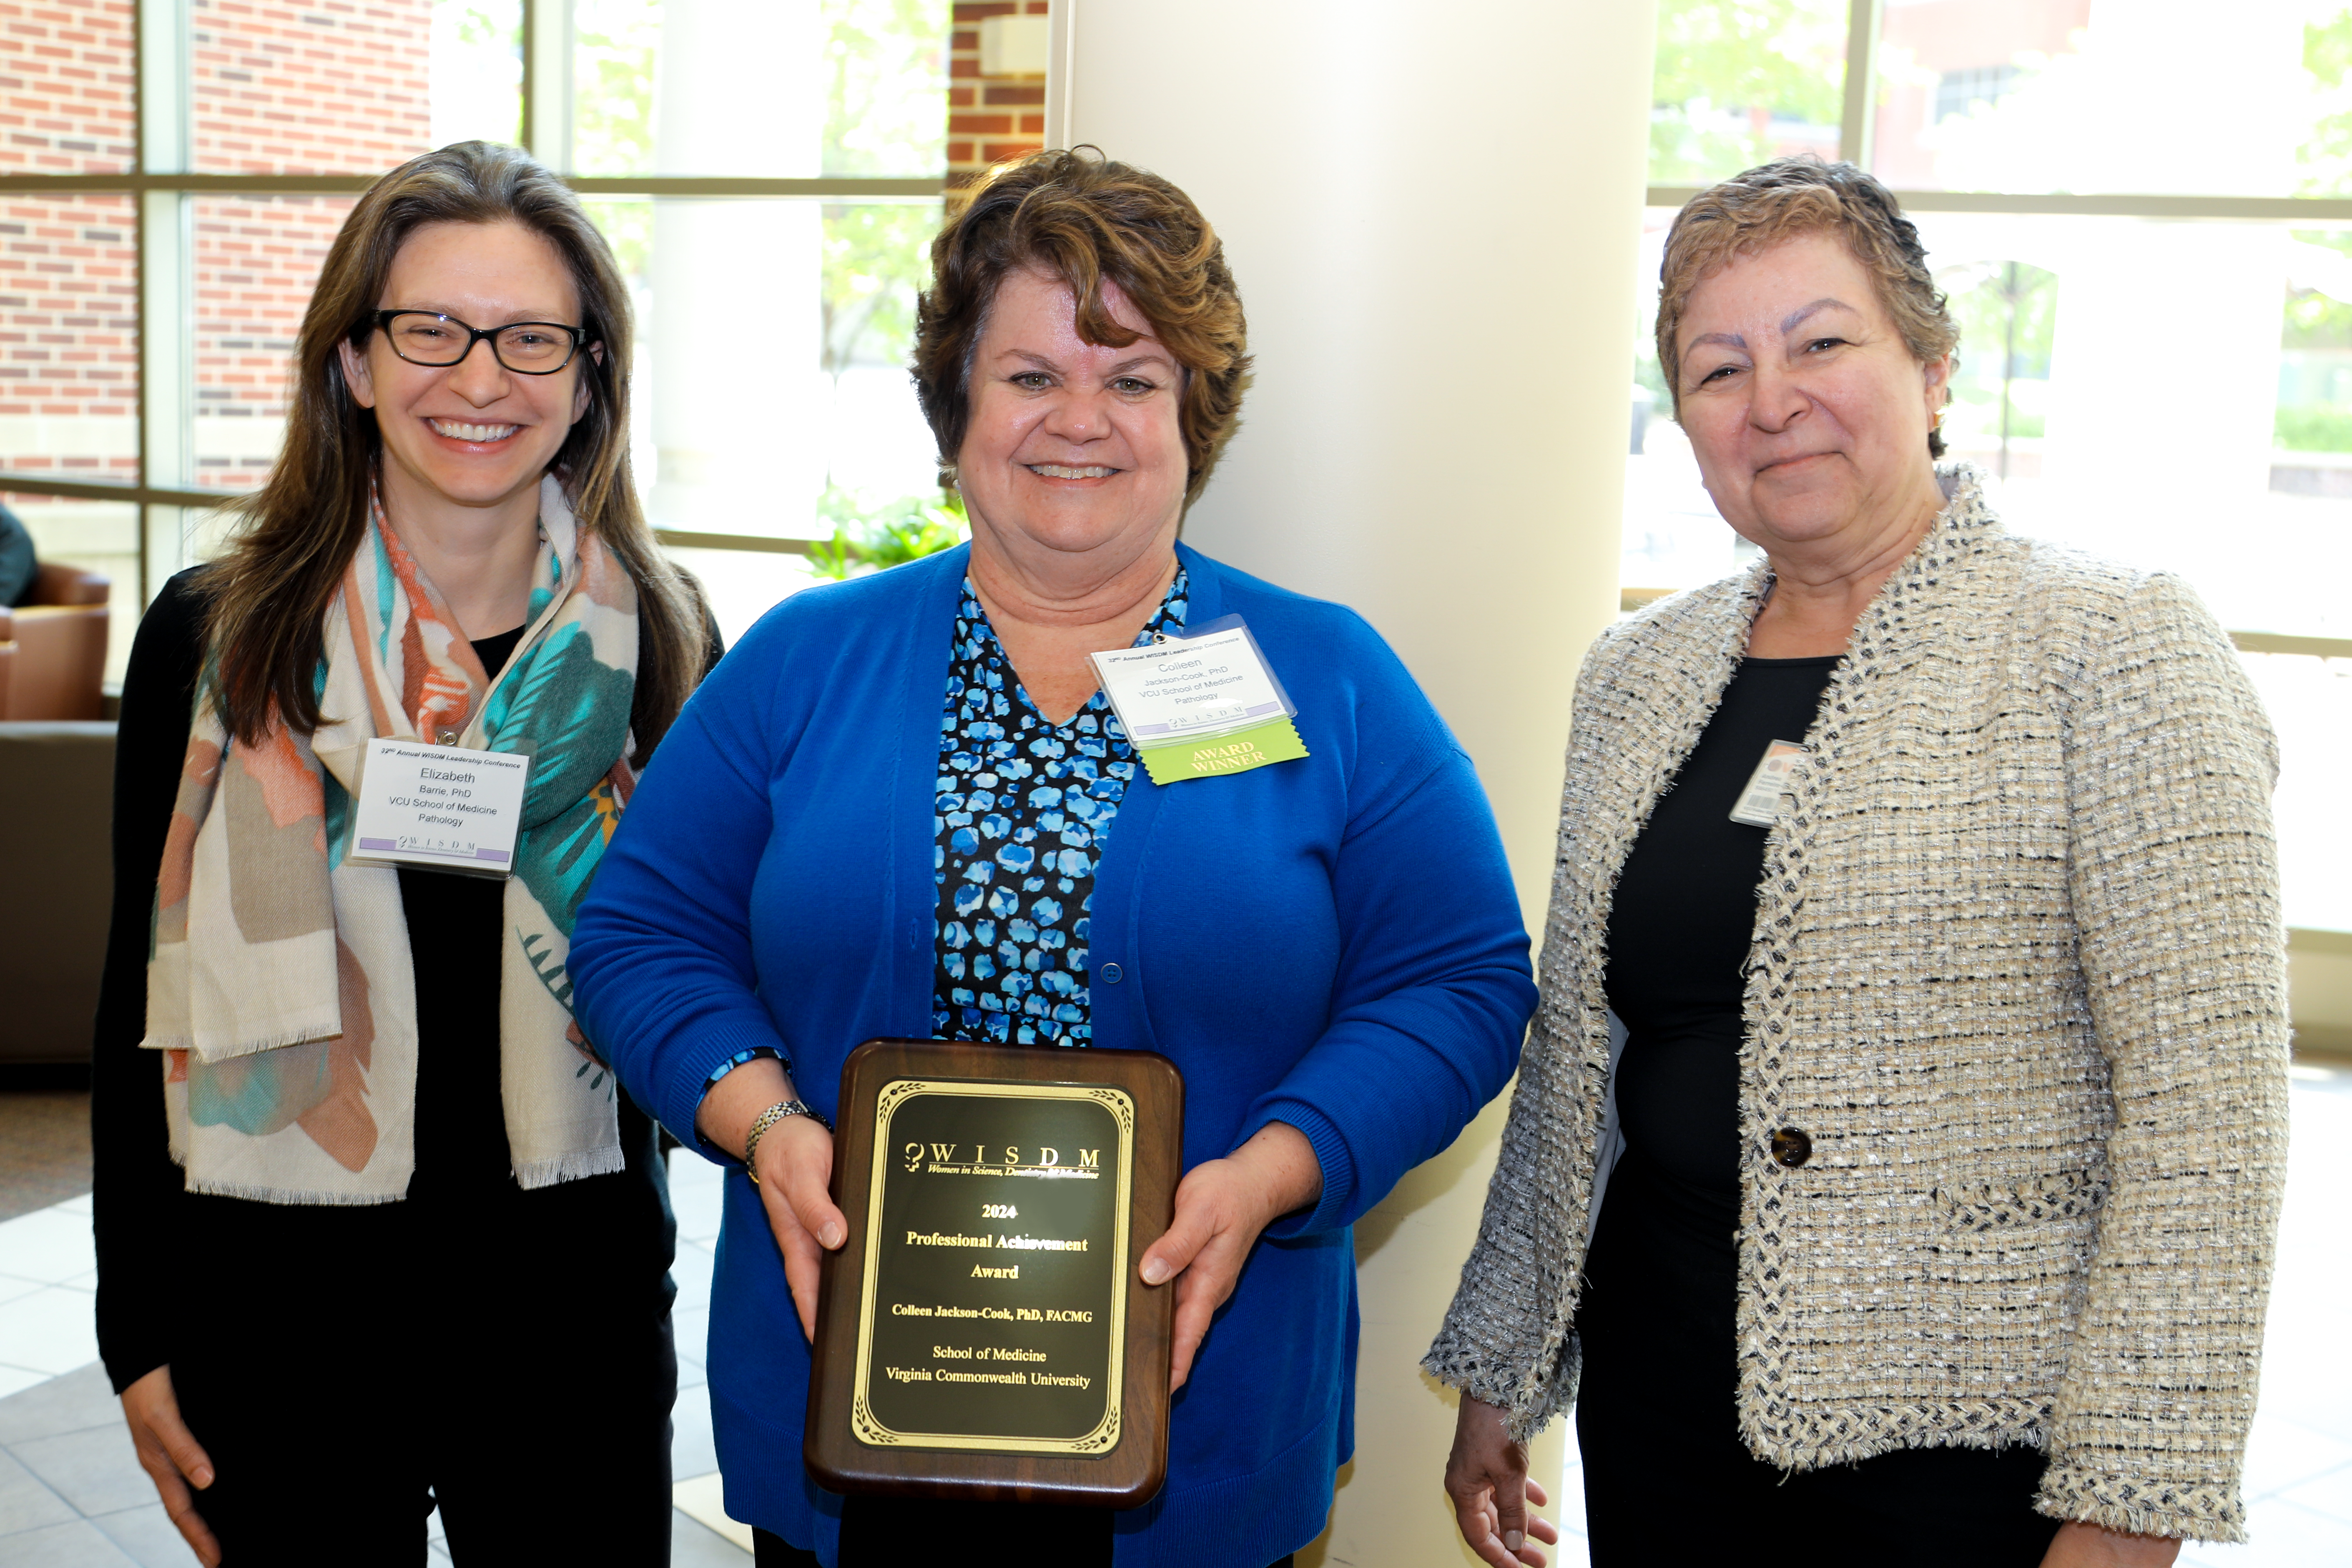 Colleen Jackson-Cook, Ph.D. (center) attended the 2024 WISDM awards ceremony with Department of Pathology colleagues Elizabeth Barrie, Ph.D. (left) and Andrea Ferreira-Gonzalez, Ph.D. (right). 